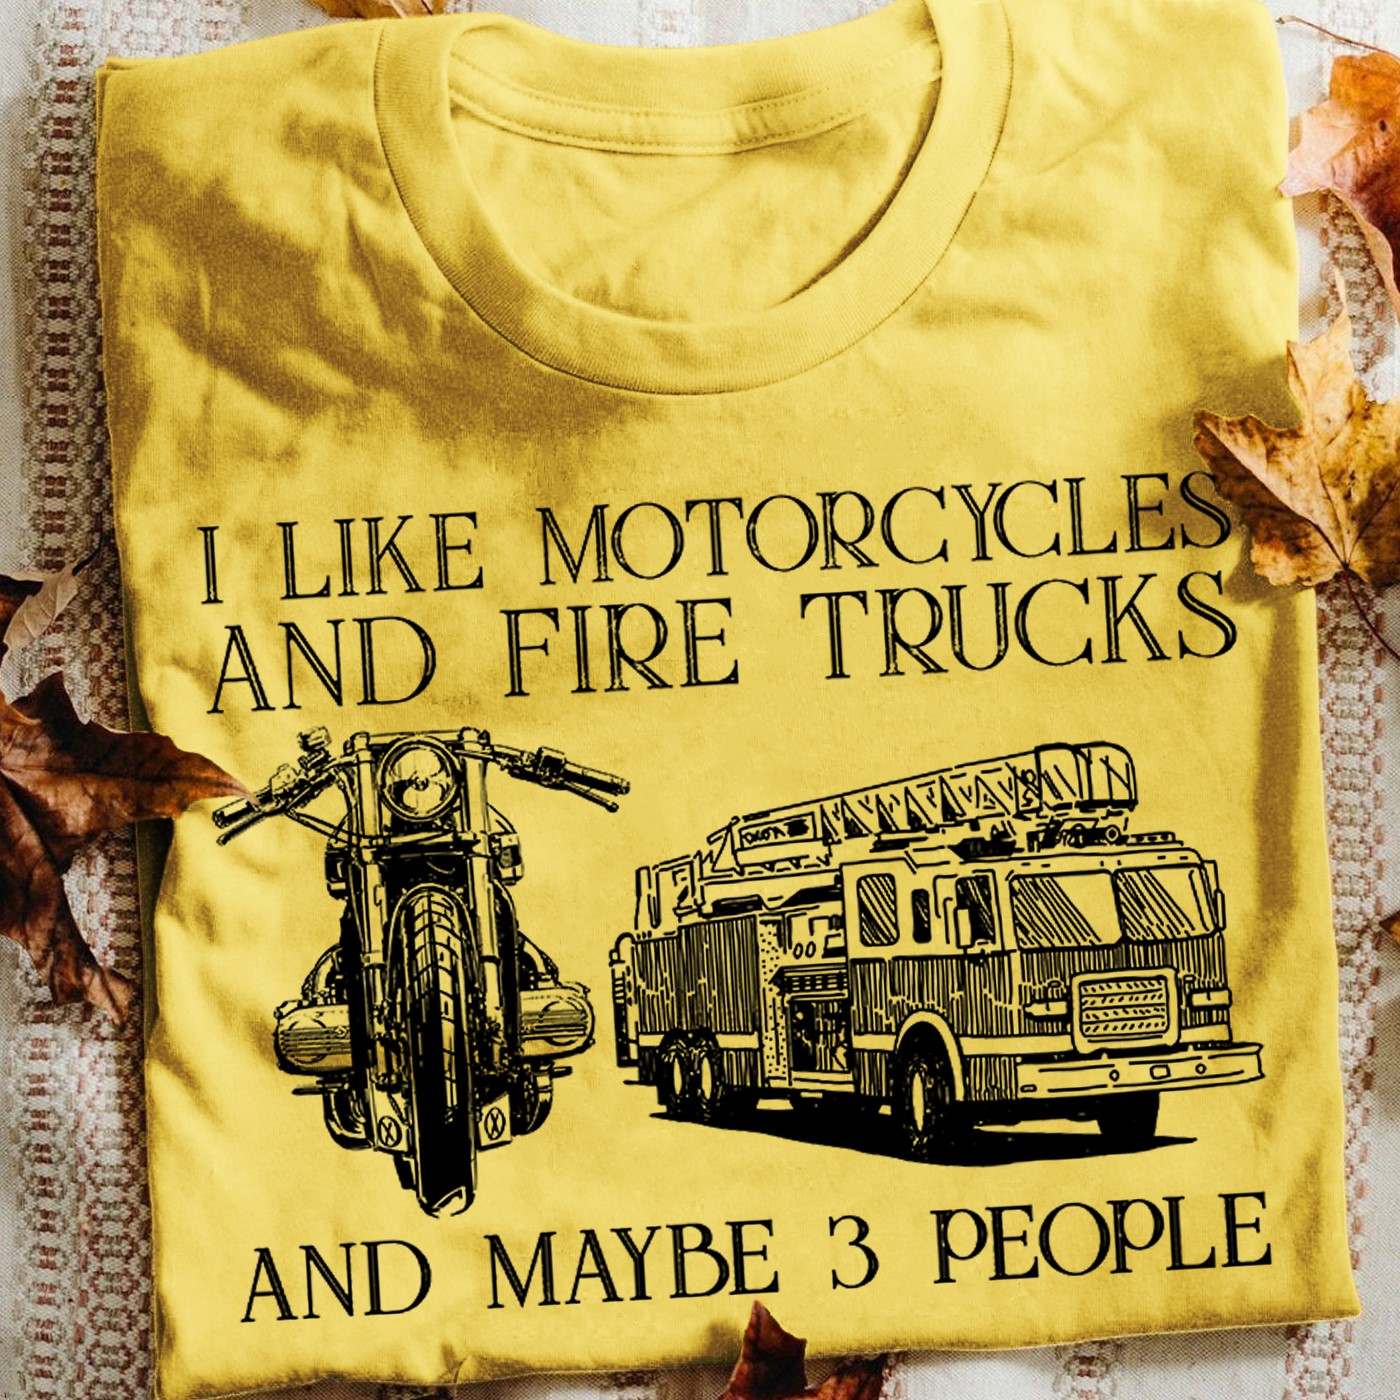 I like motorcycles and fire trucks and maybe 3 people - Fire truck driver